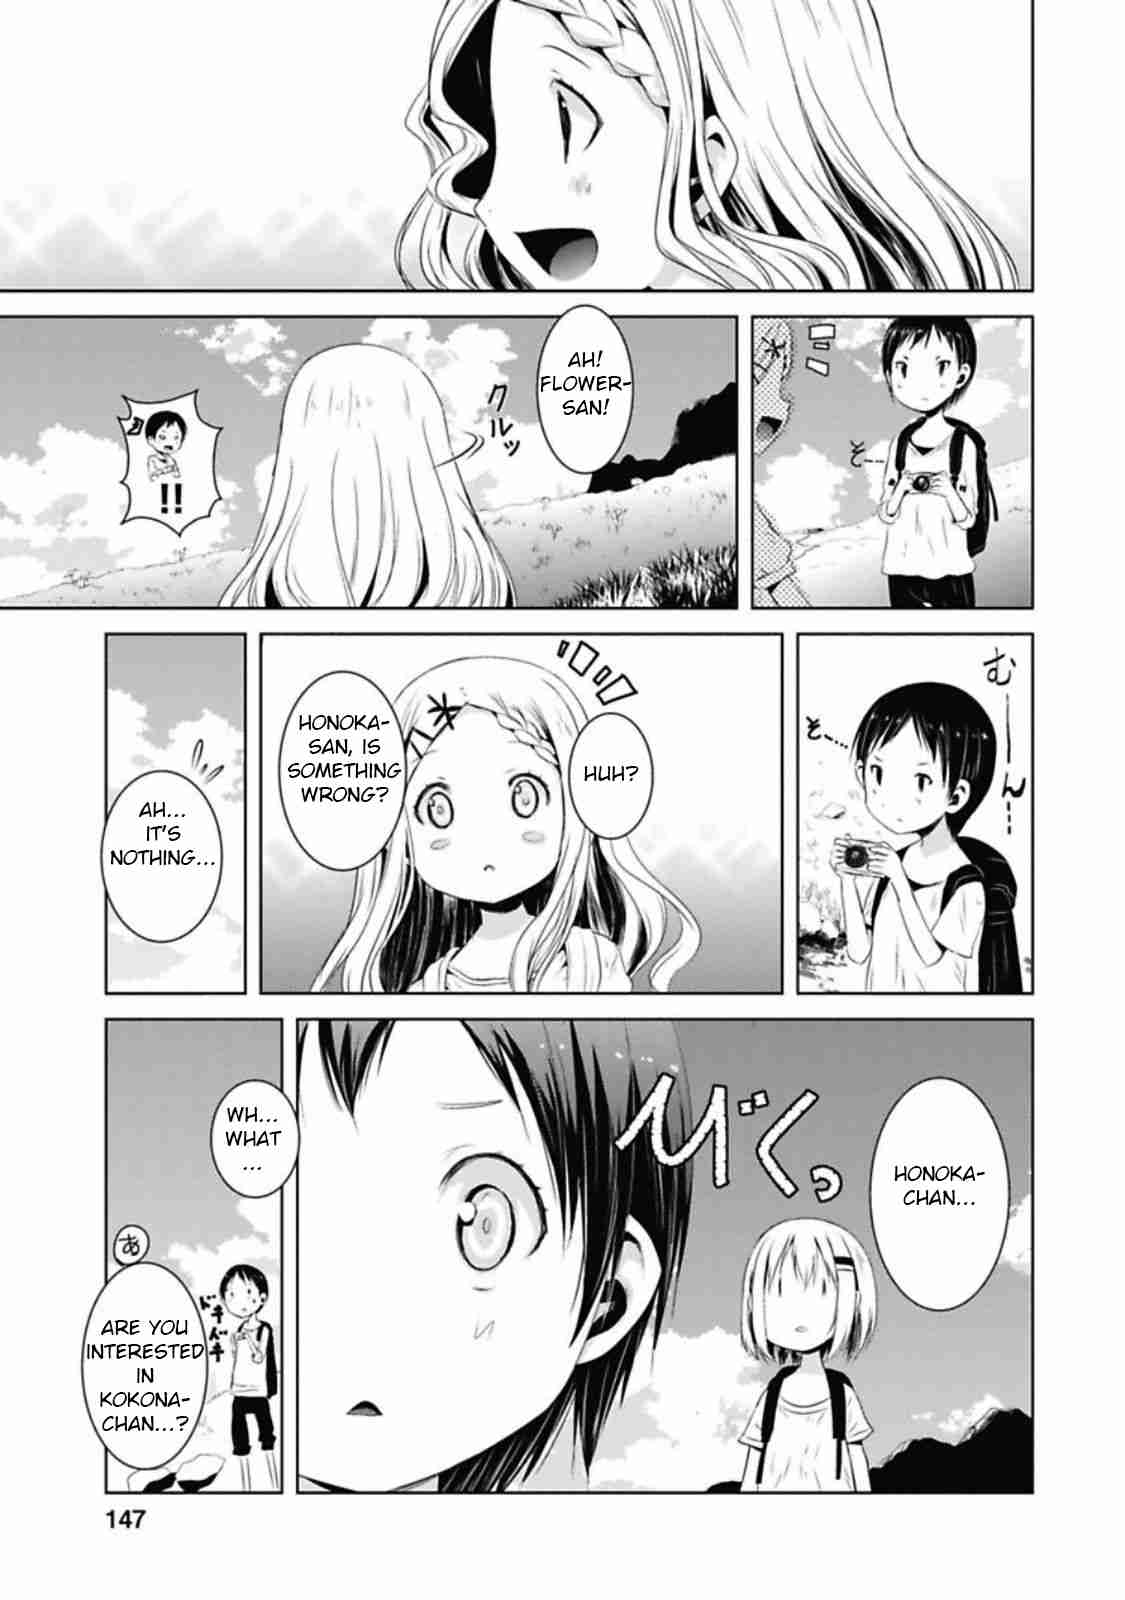 Yama no Susume Vol. 5 Ch. 39 I Want To Capture Smiles